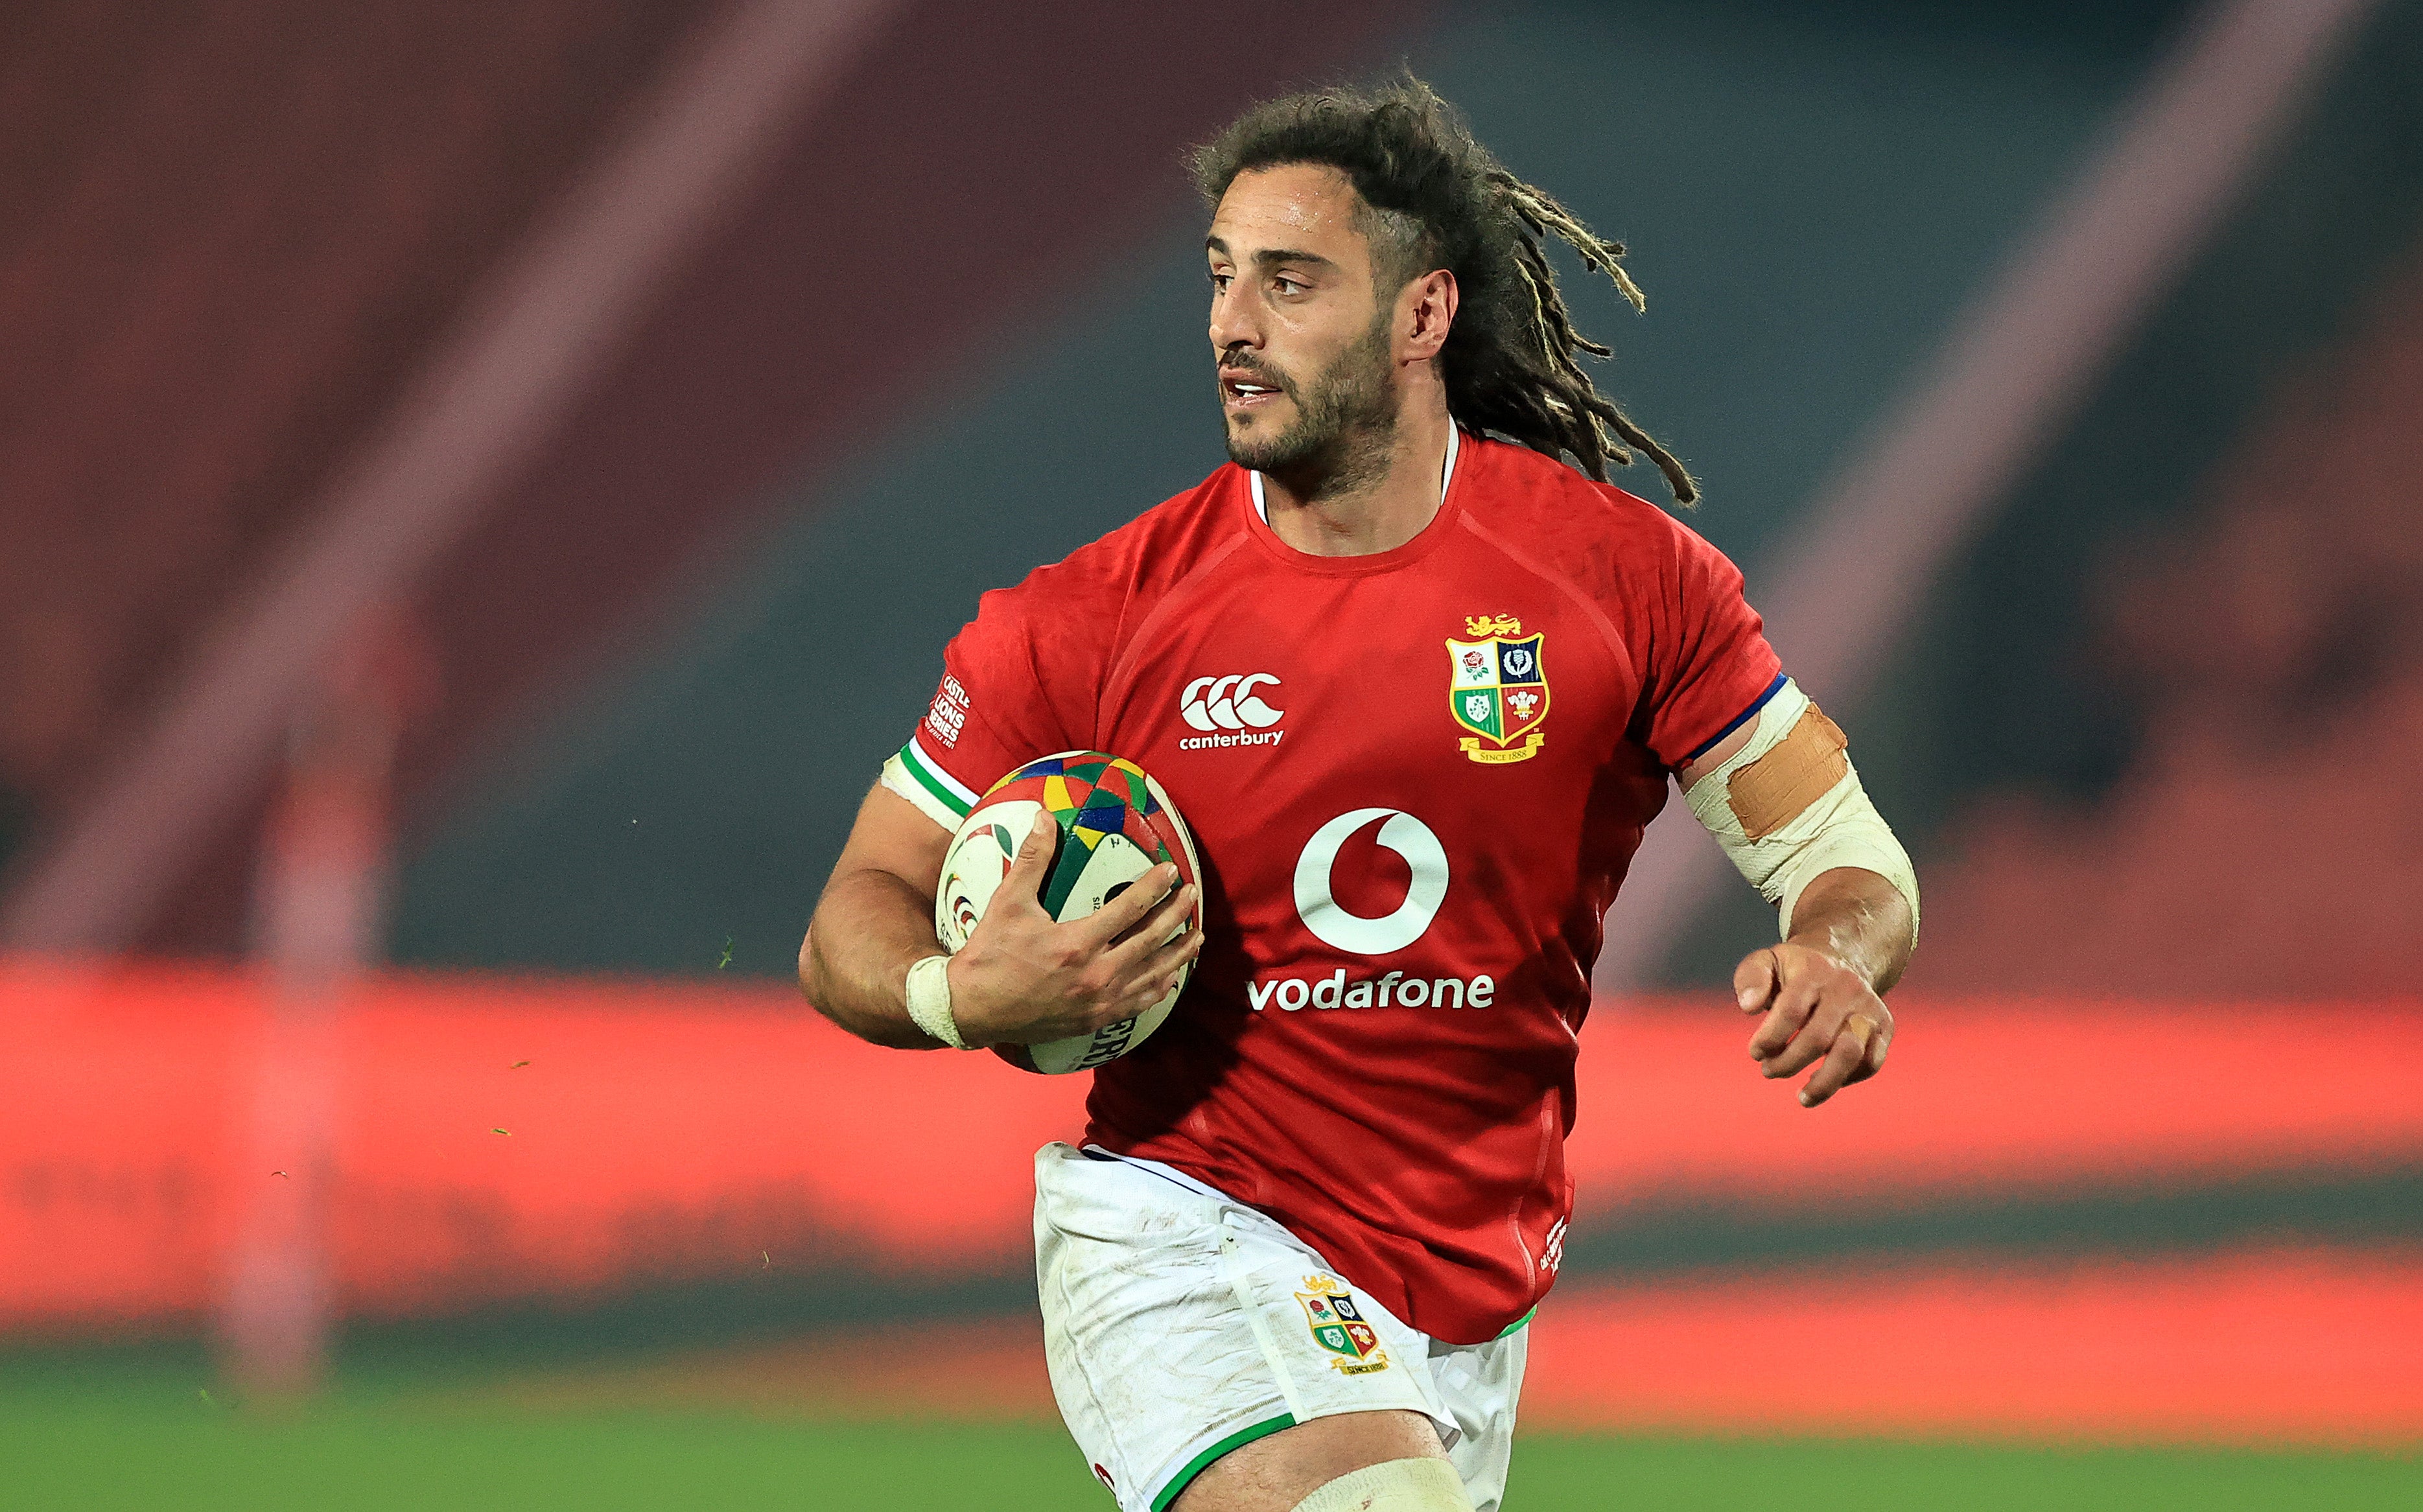 Josh Navidi has been forced to retire form rugby due to a neck injury